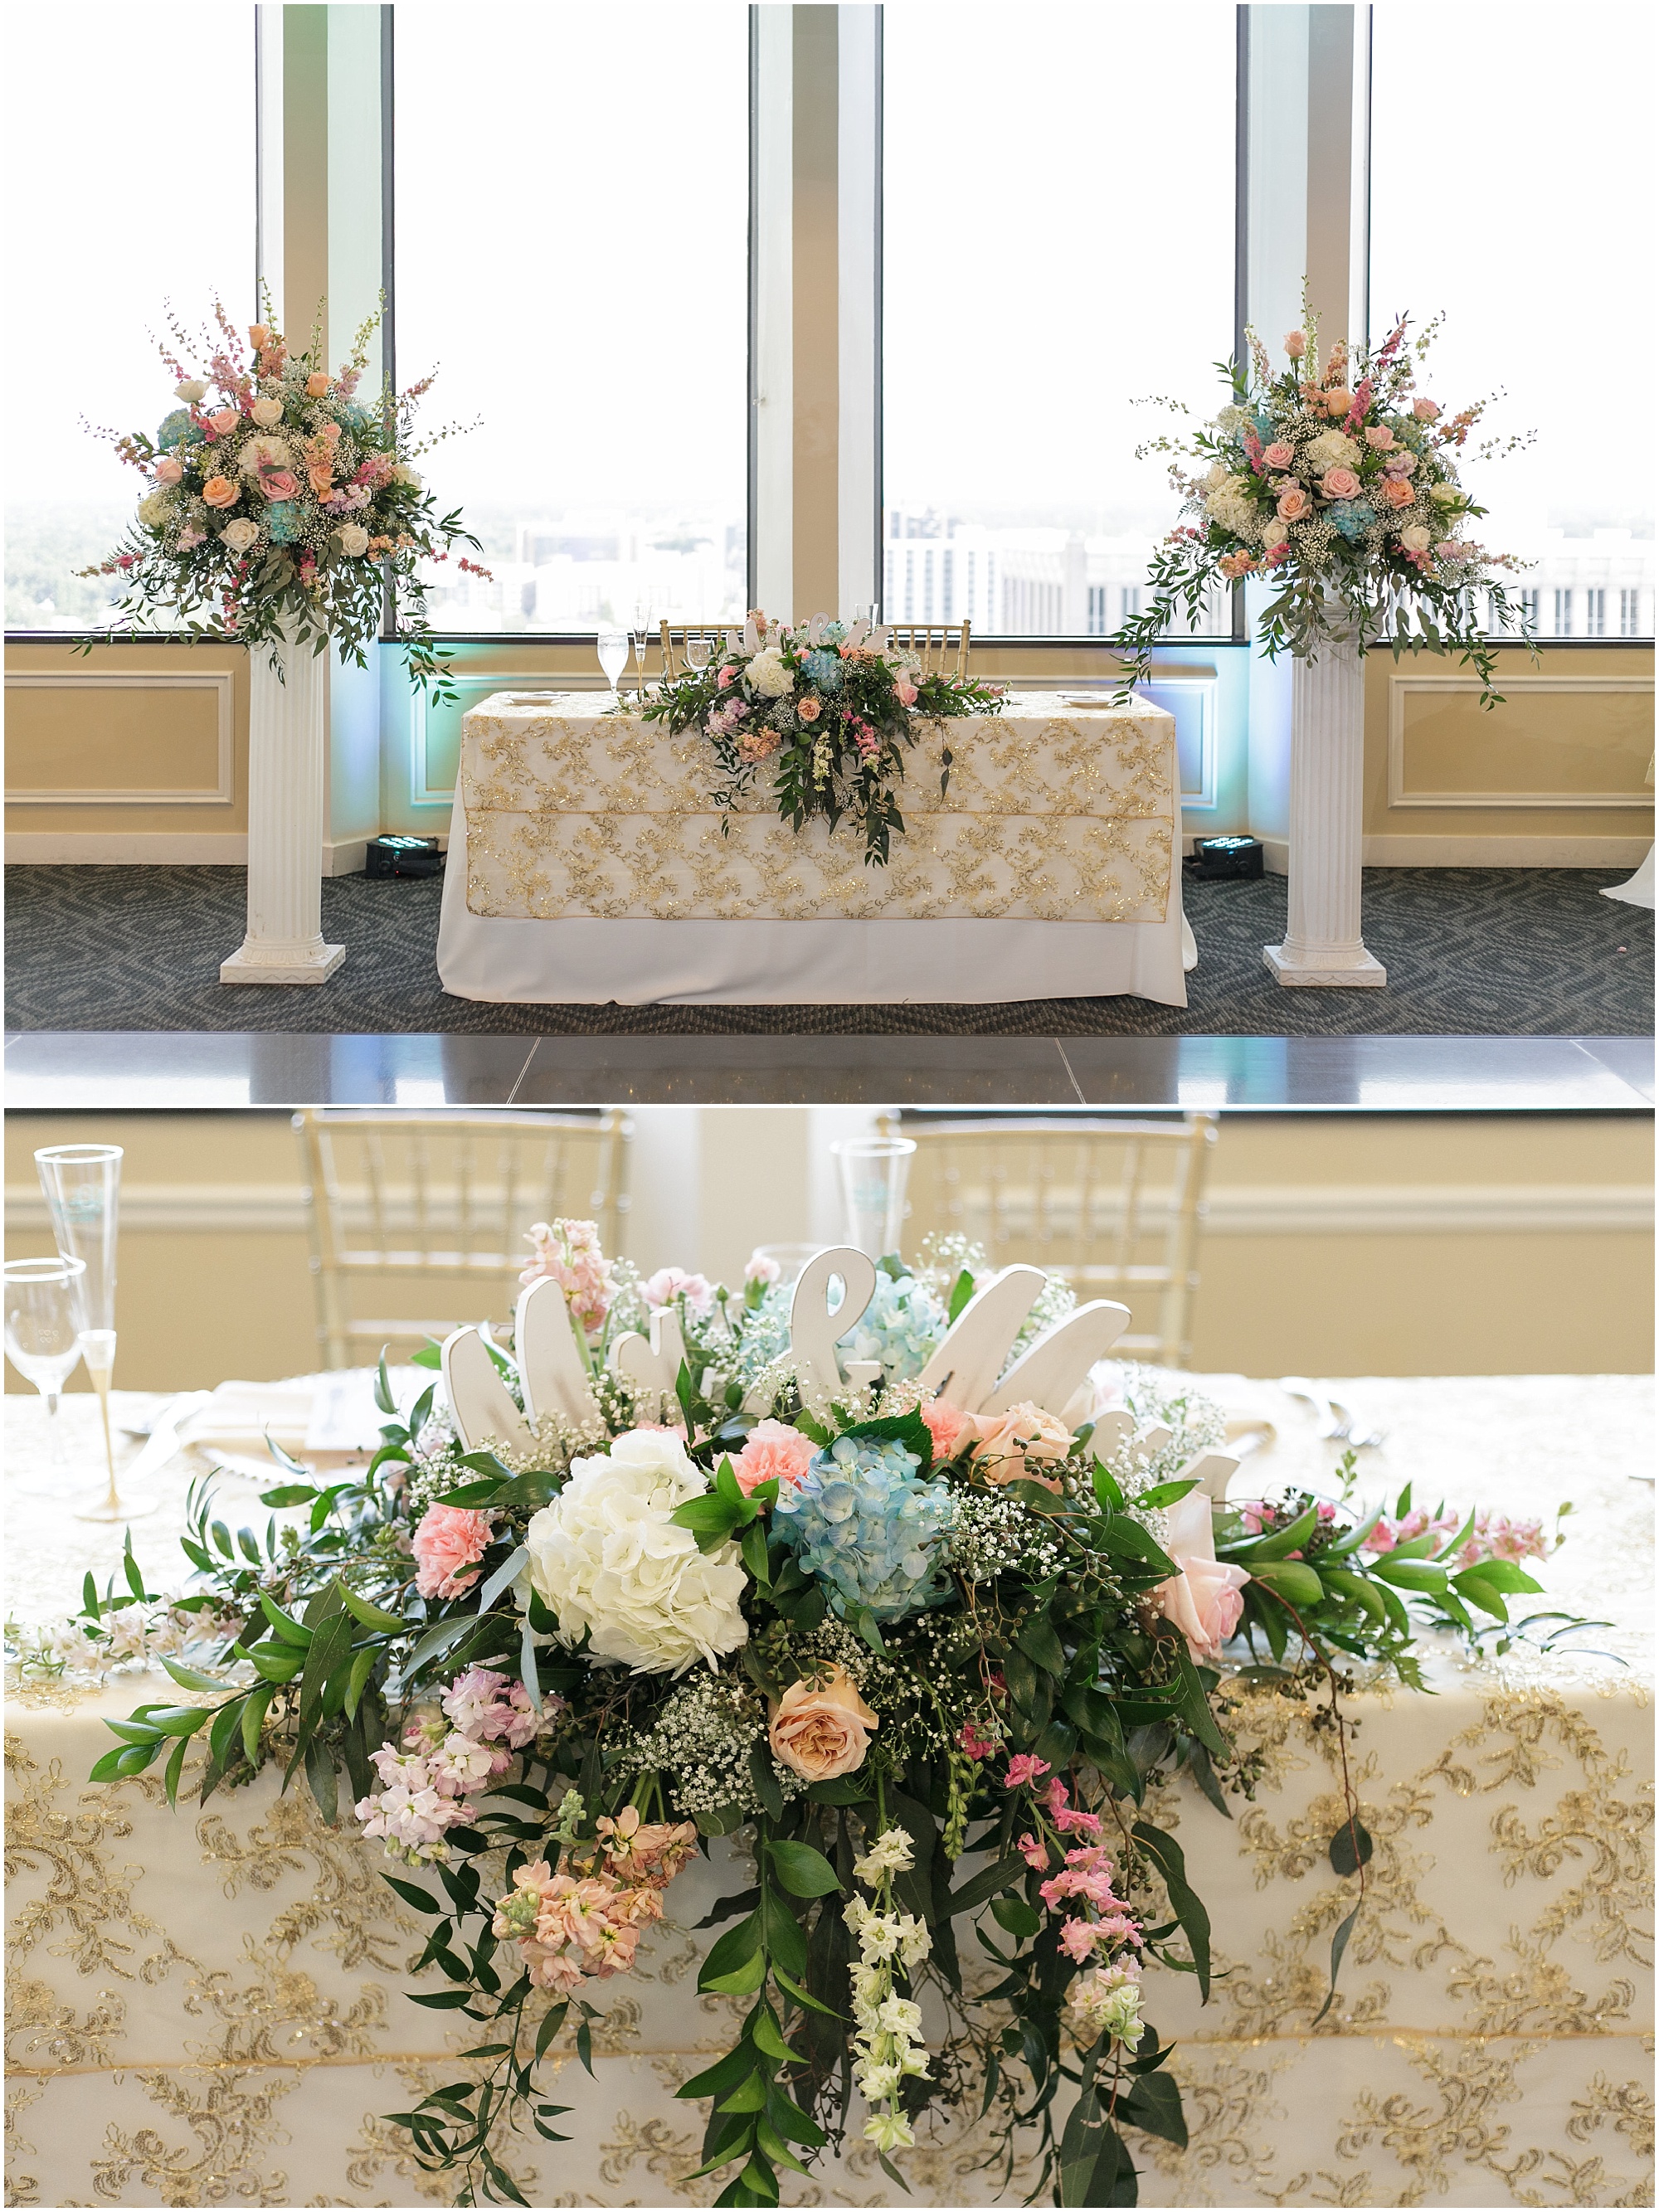 Sweetheart table decorated with florals in shades of pink, blue, and peach. 